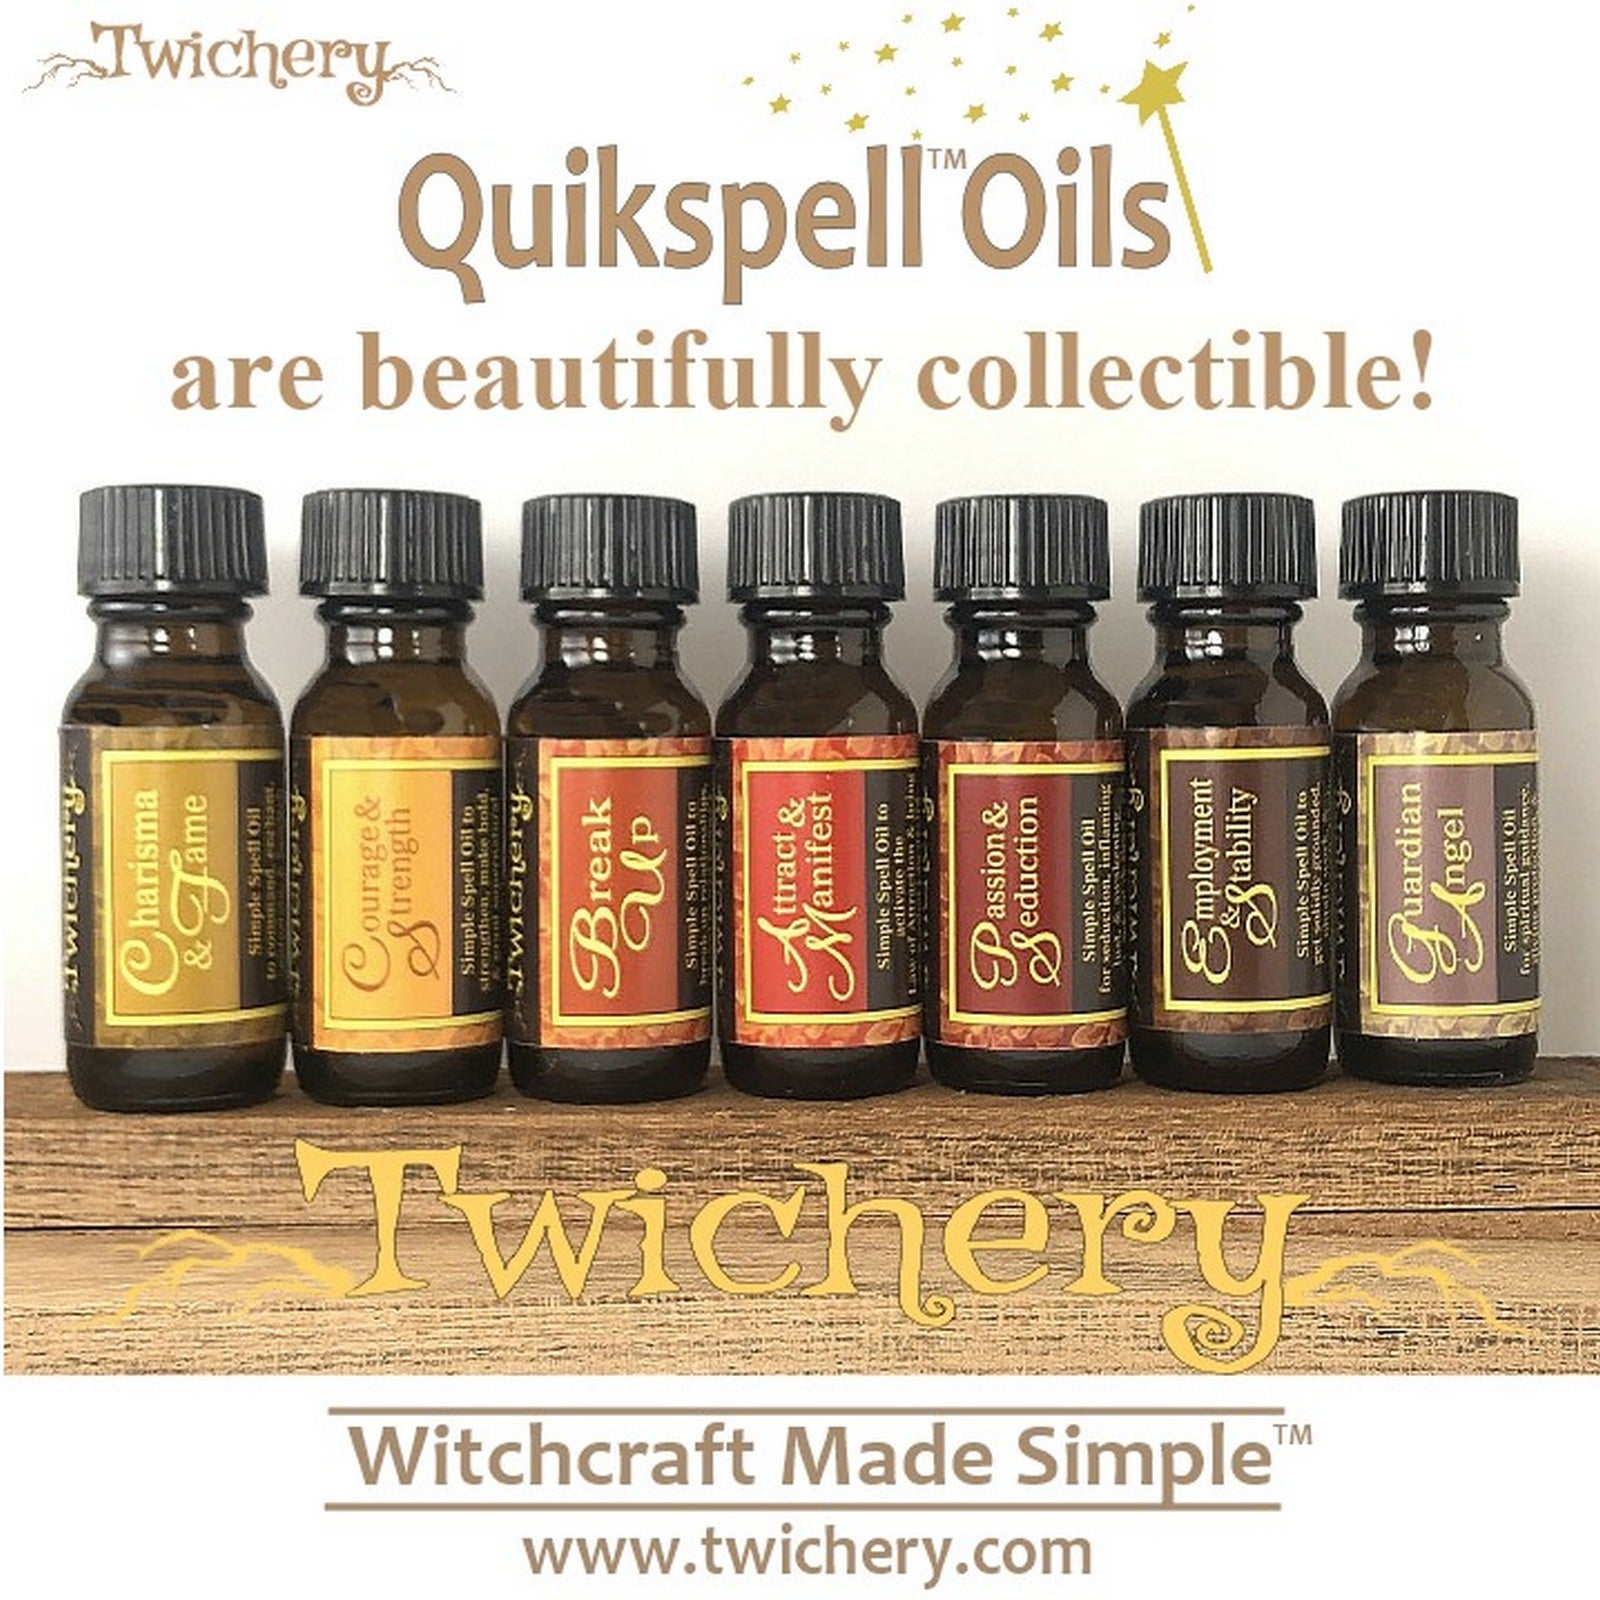 Collect all 24 Twichery Quikspell Oils for all your magickal needs, including laser focus when you need it most. Magickal quick thinking. Hoodoo, Voodoo, Wicca, Witchcraft Made Simple